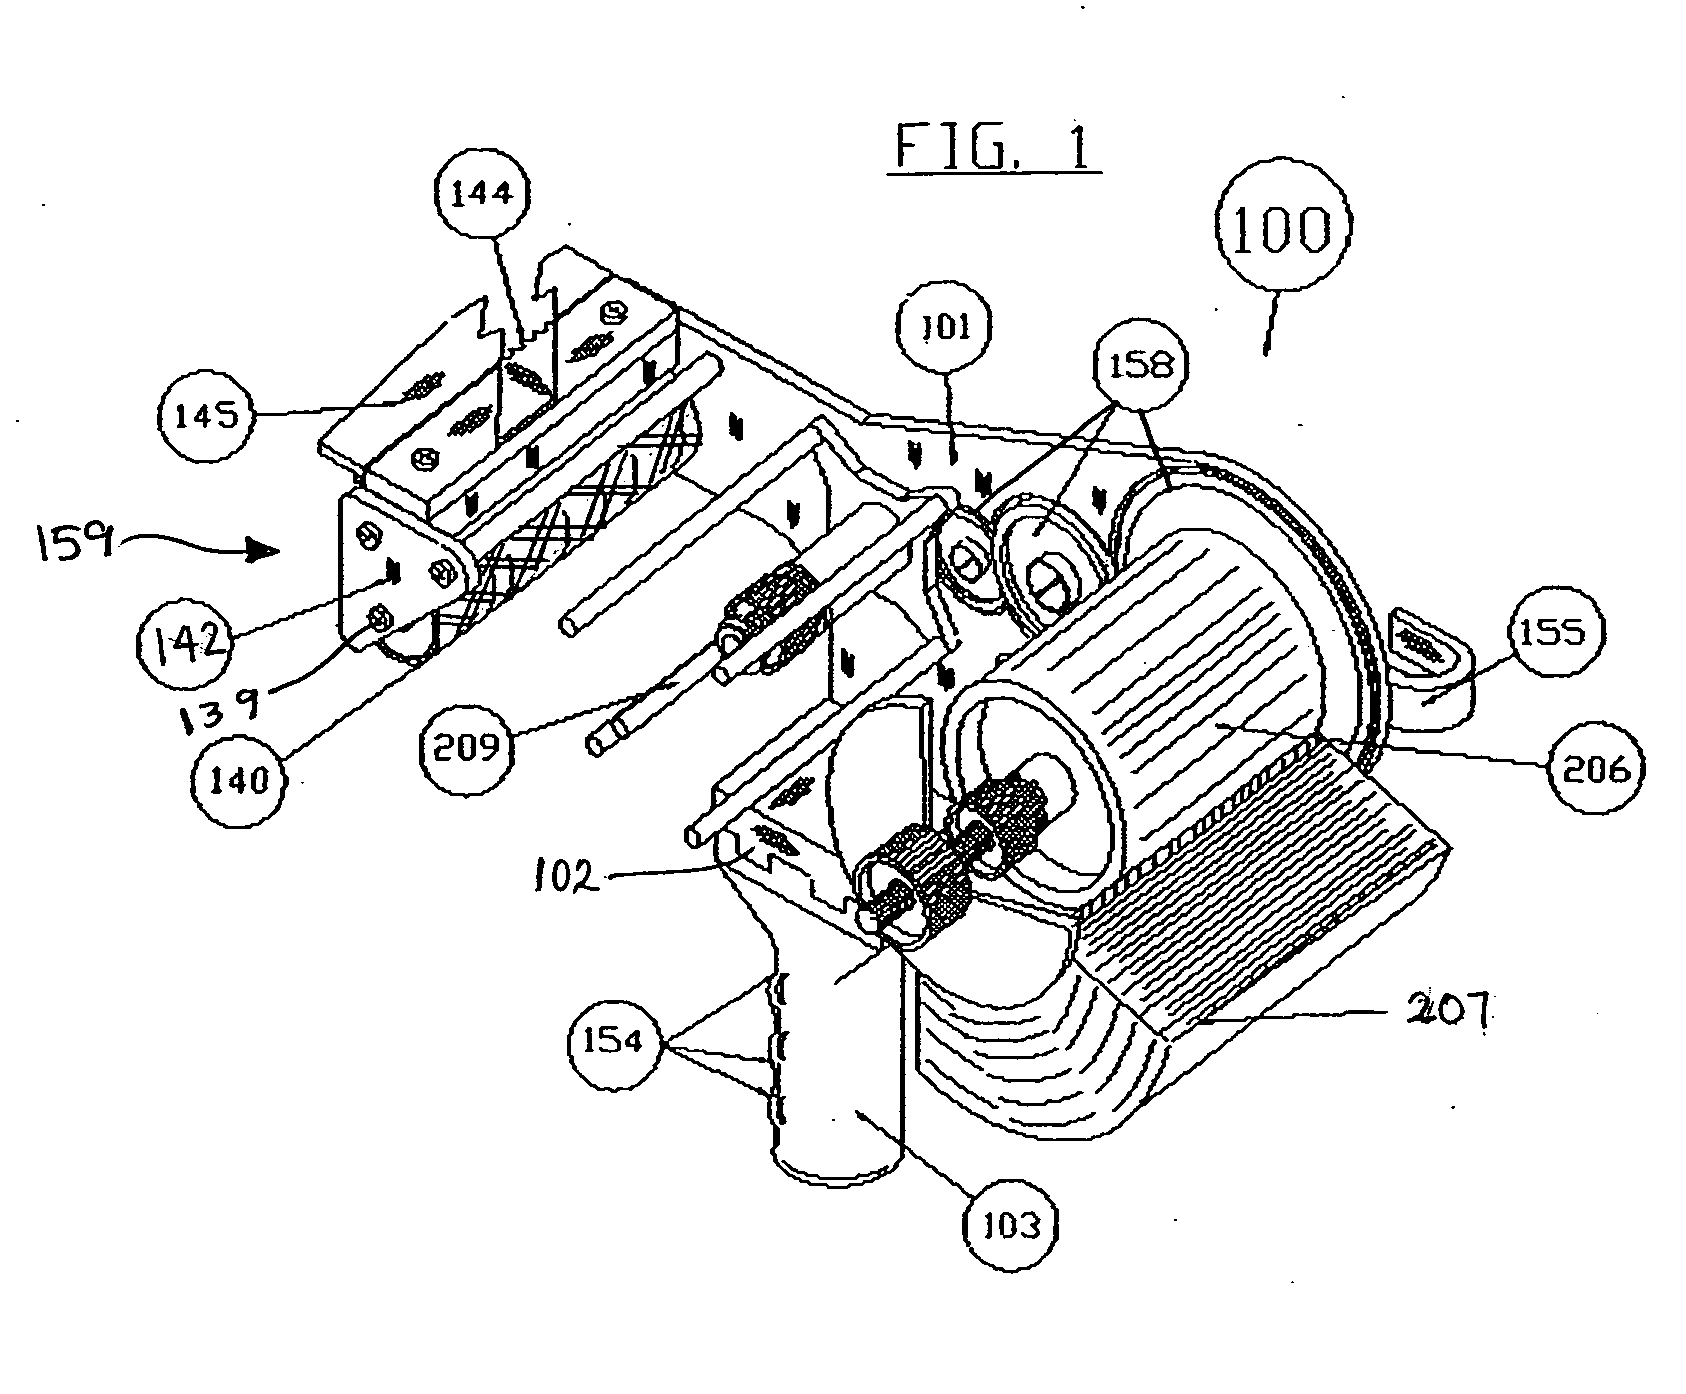 Tape pressure roller with patterned surface for tape applicator